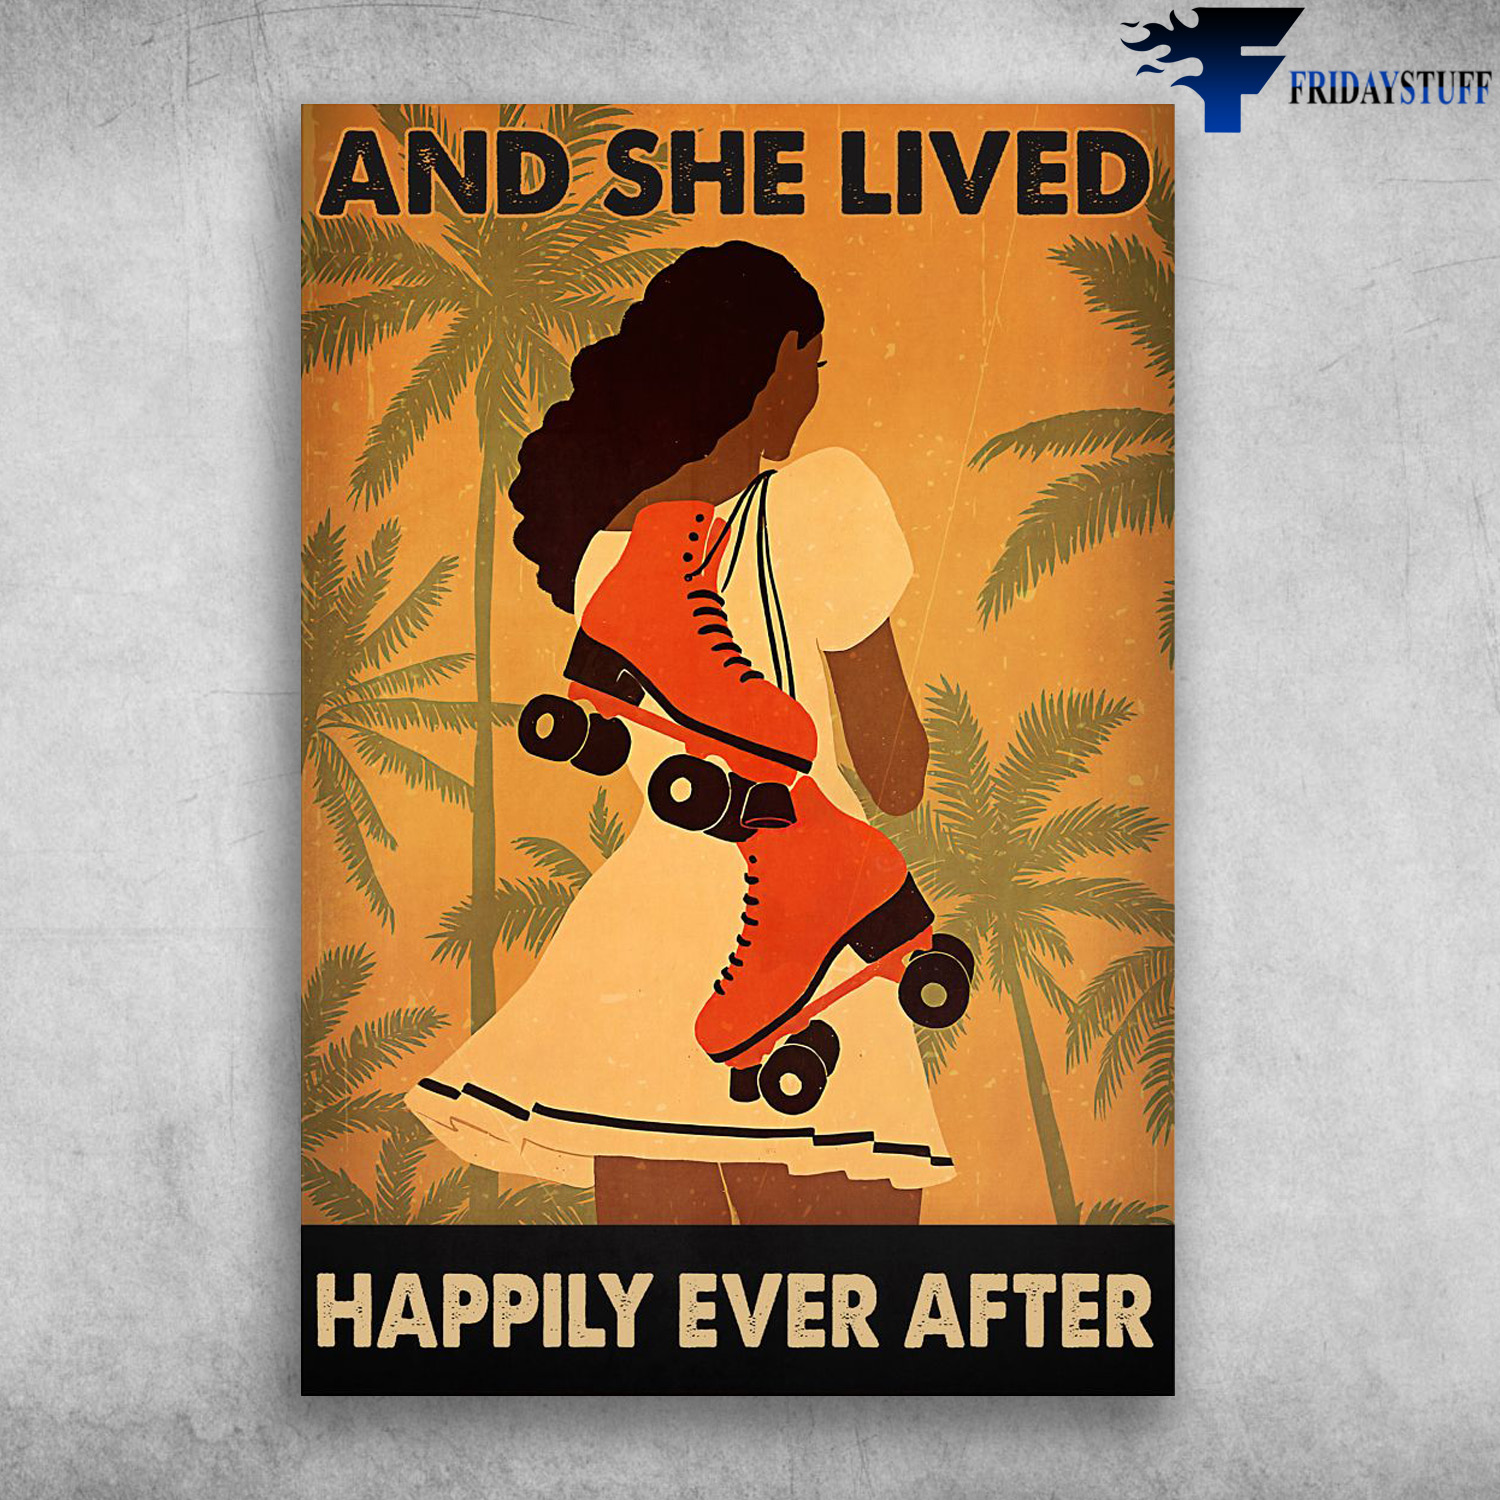 Beautiful Girl Roller Skating - And She Lived, Happily Ever After